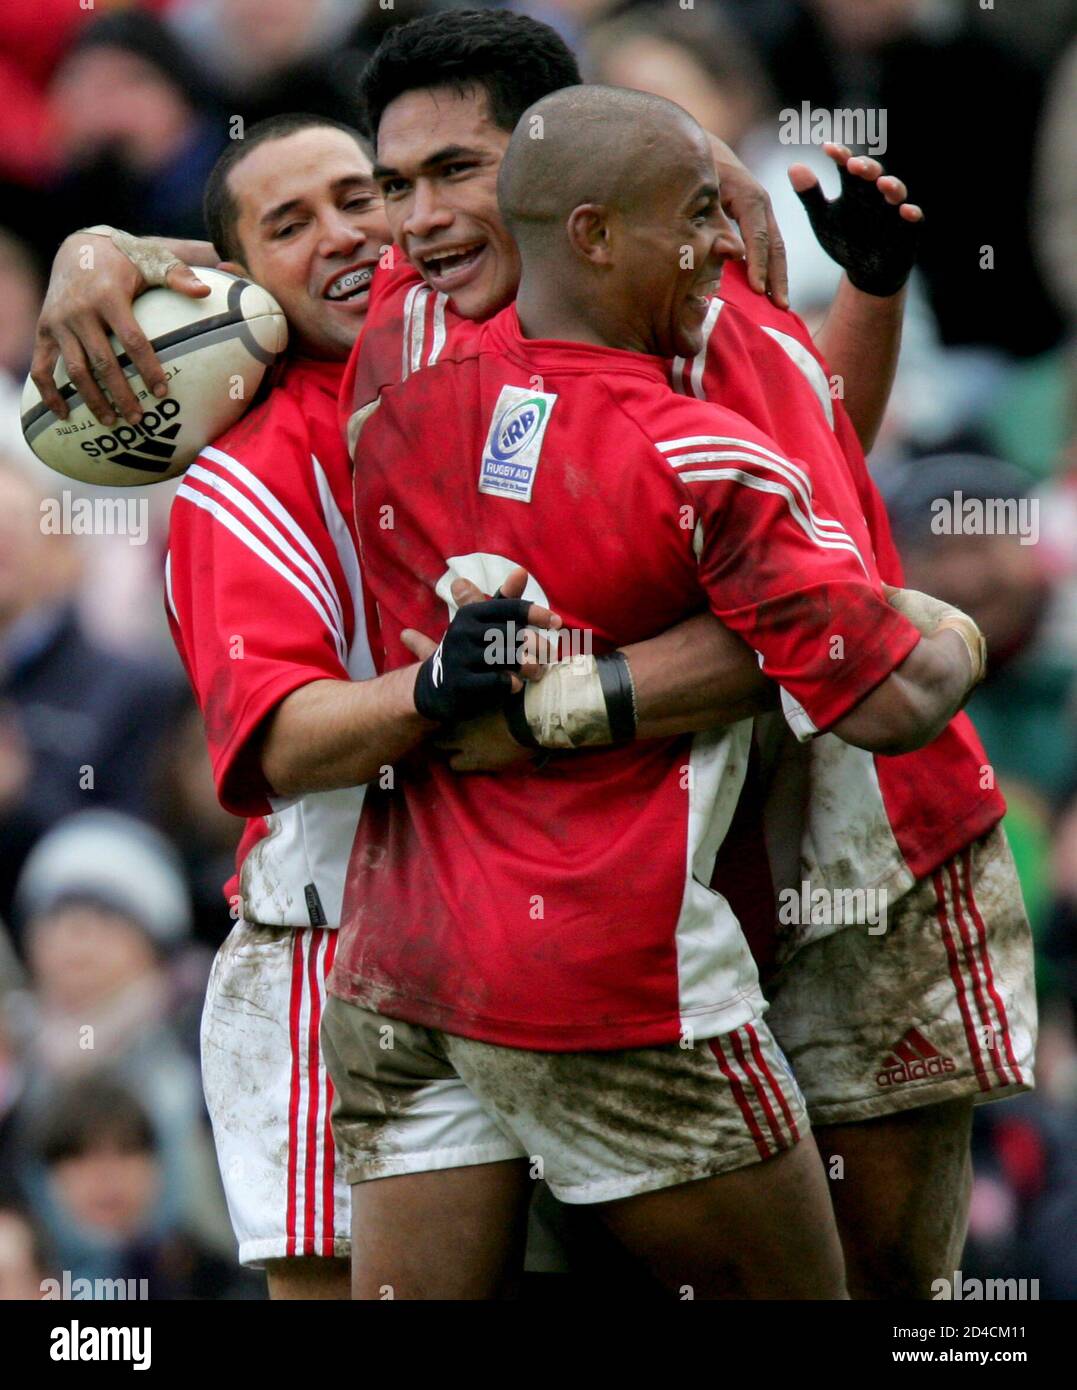 Gregan and Drahm celebrate with Sititi from the southern hemisphere after  Sititi scored a try in their tsunami benefit rugby union match at  Twickenham in London. Southern hemisphere players Australia's George Gregan  (